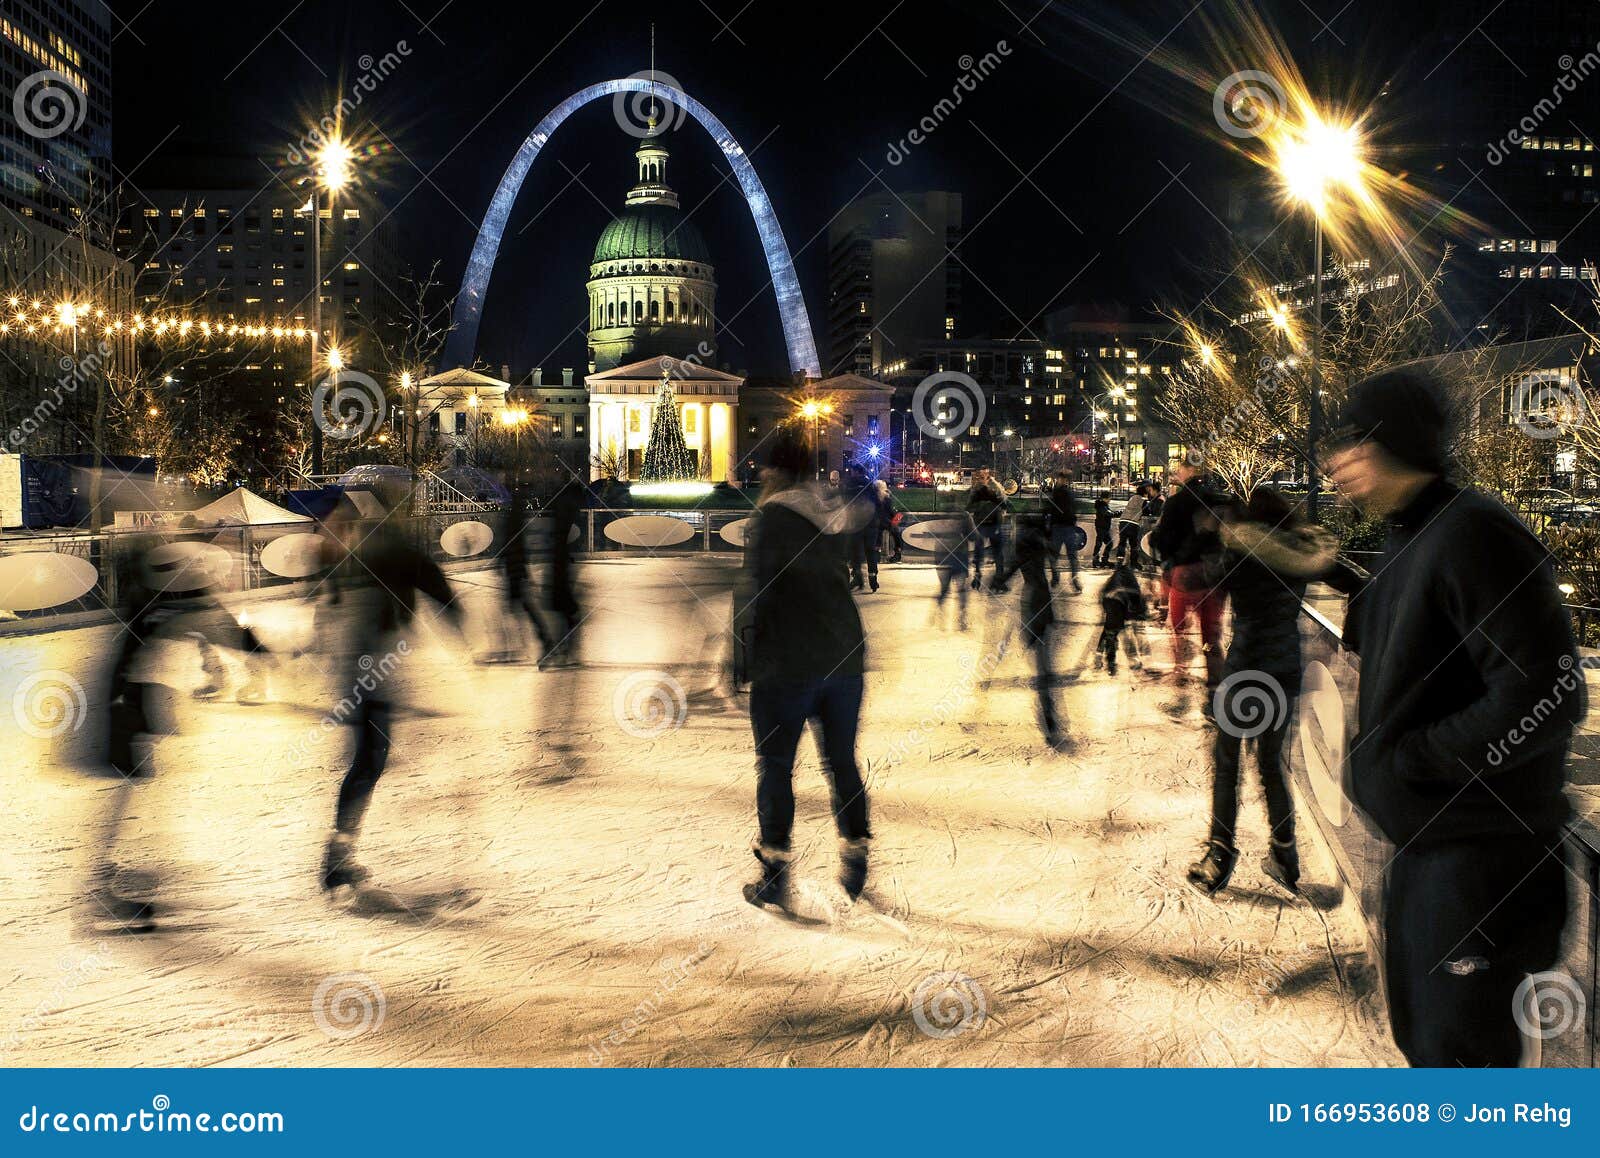 St Louis, Missouri, Usa, Dec 2019 - Ice Skaters On Rink In Front Of St Louis Gateway Arch And ...